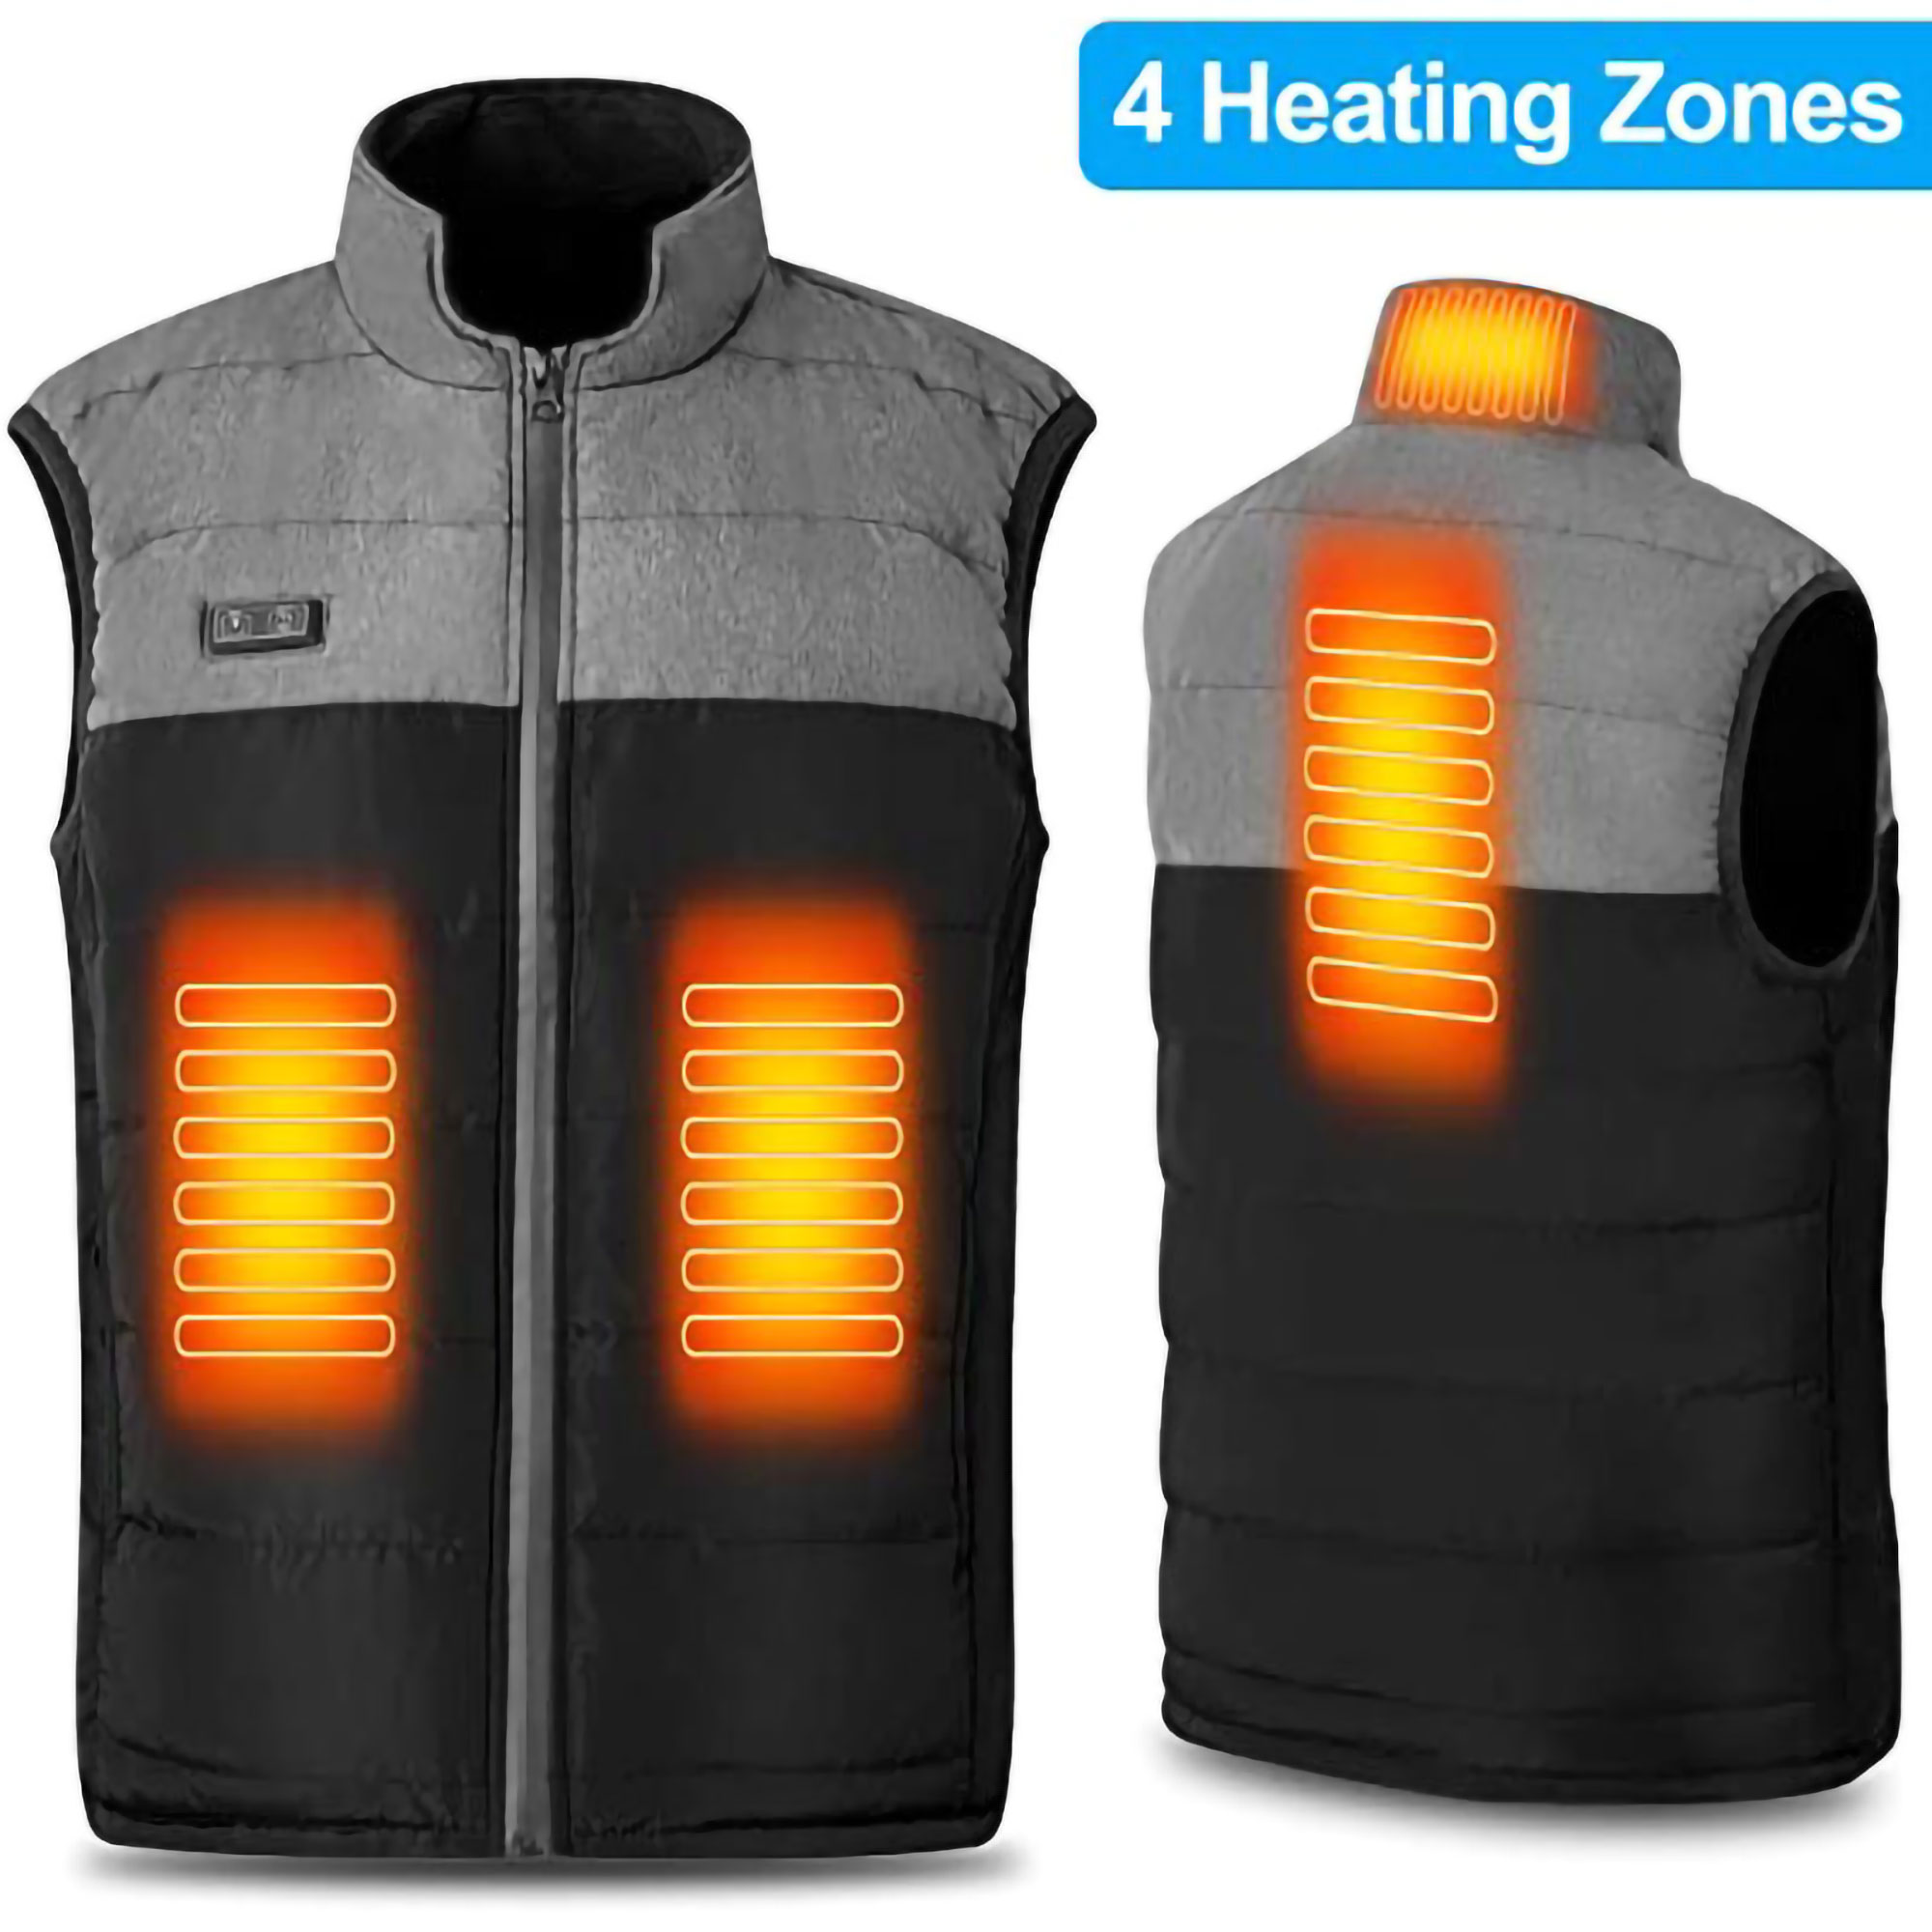 Sexy Dance Electric Heated Vest for Men Women Heating Jacket Sleeveless Zipper Coat Lightweight Thermal Outwear With 10000mHA Power Bank - image 3 of 11